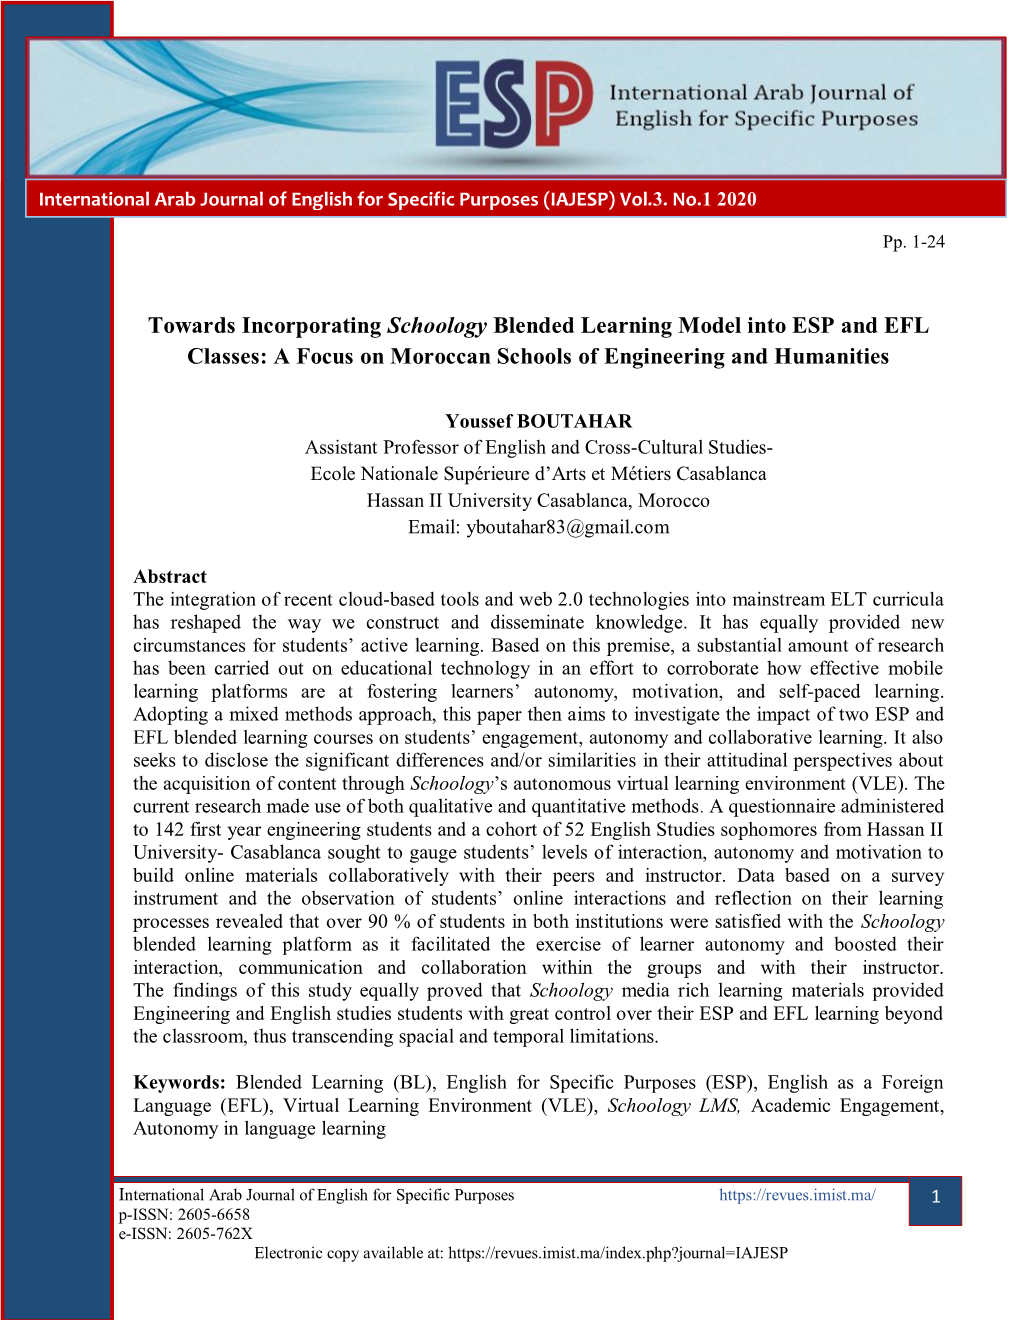 Towards Incorporating Schoology Blended Learning Model Into ESP and EFL Classes: a Focus on Moroccan Schools of Engineering and Humanities